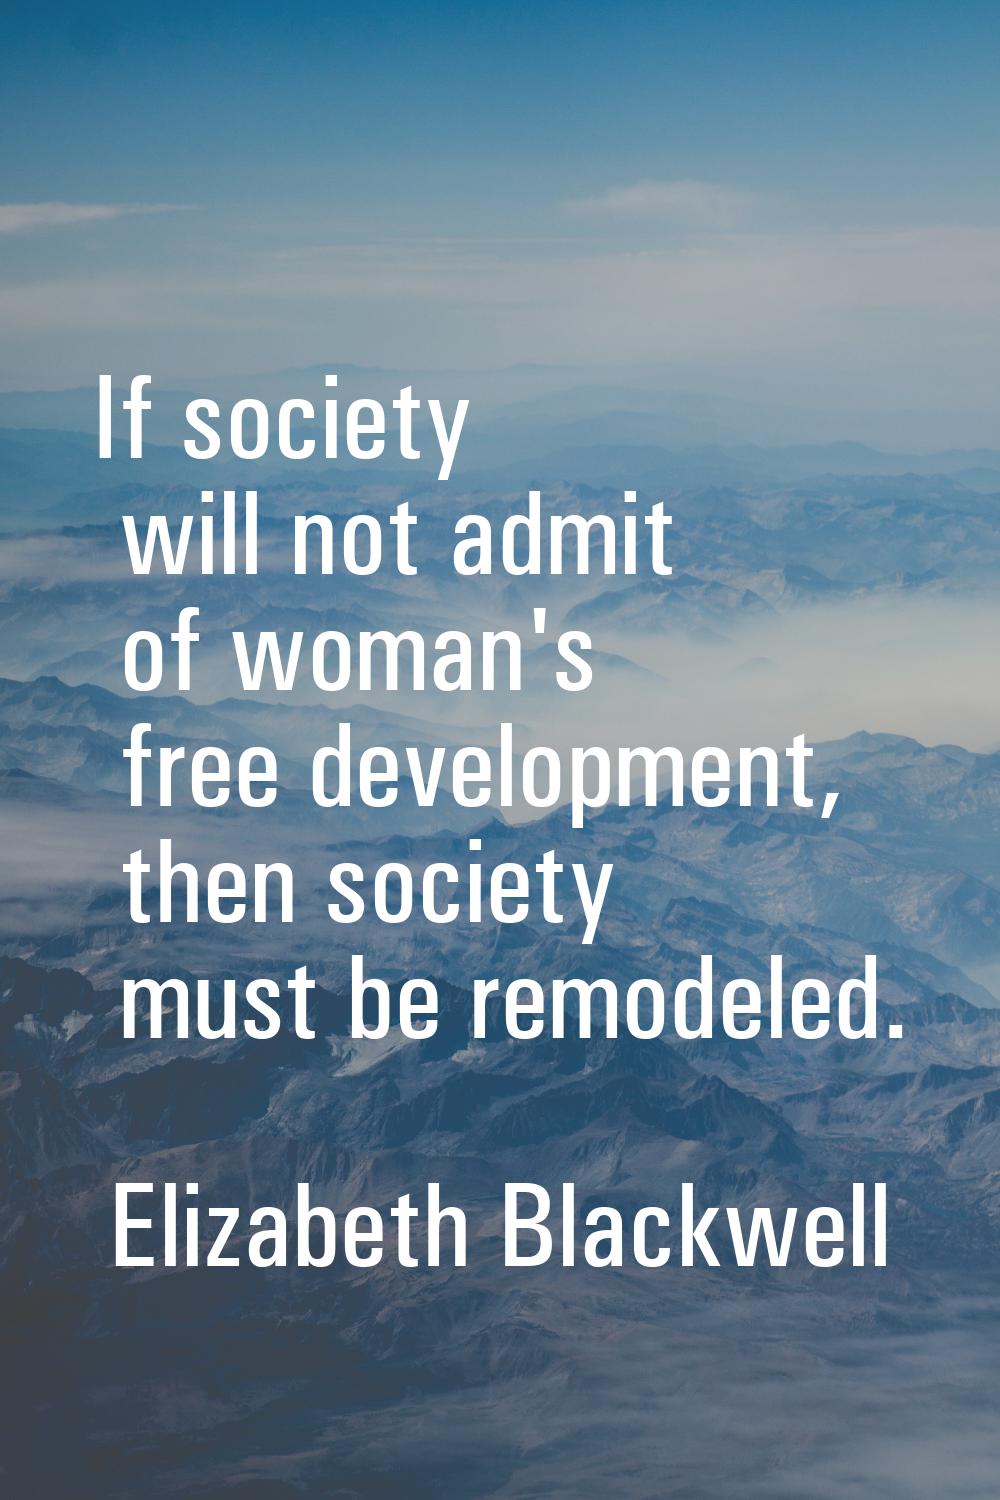 If society will not admit of woman's free development, then society must be remodeled.